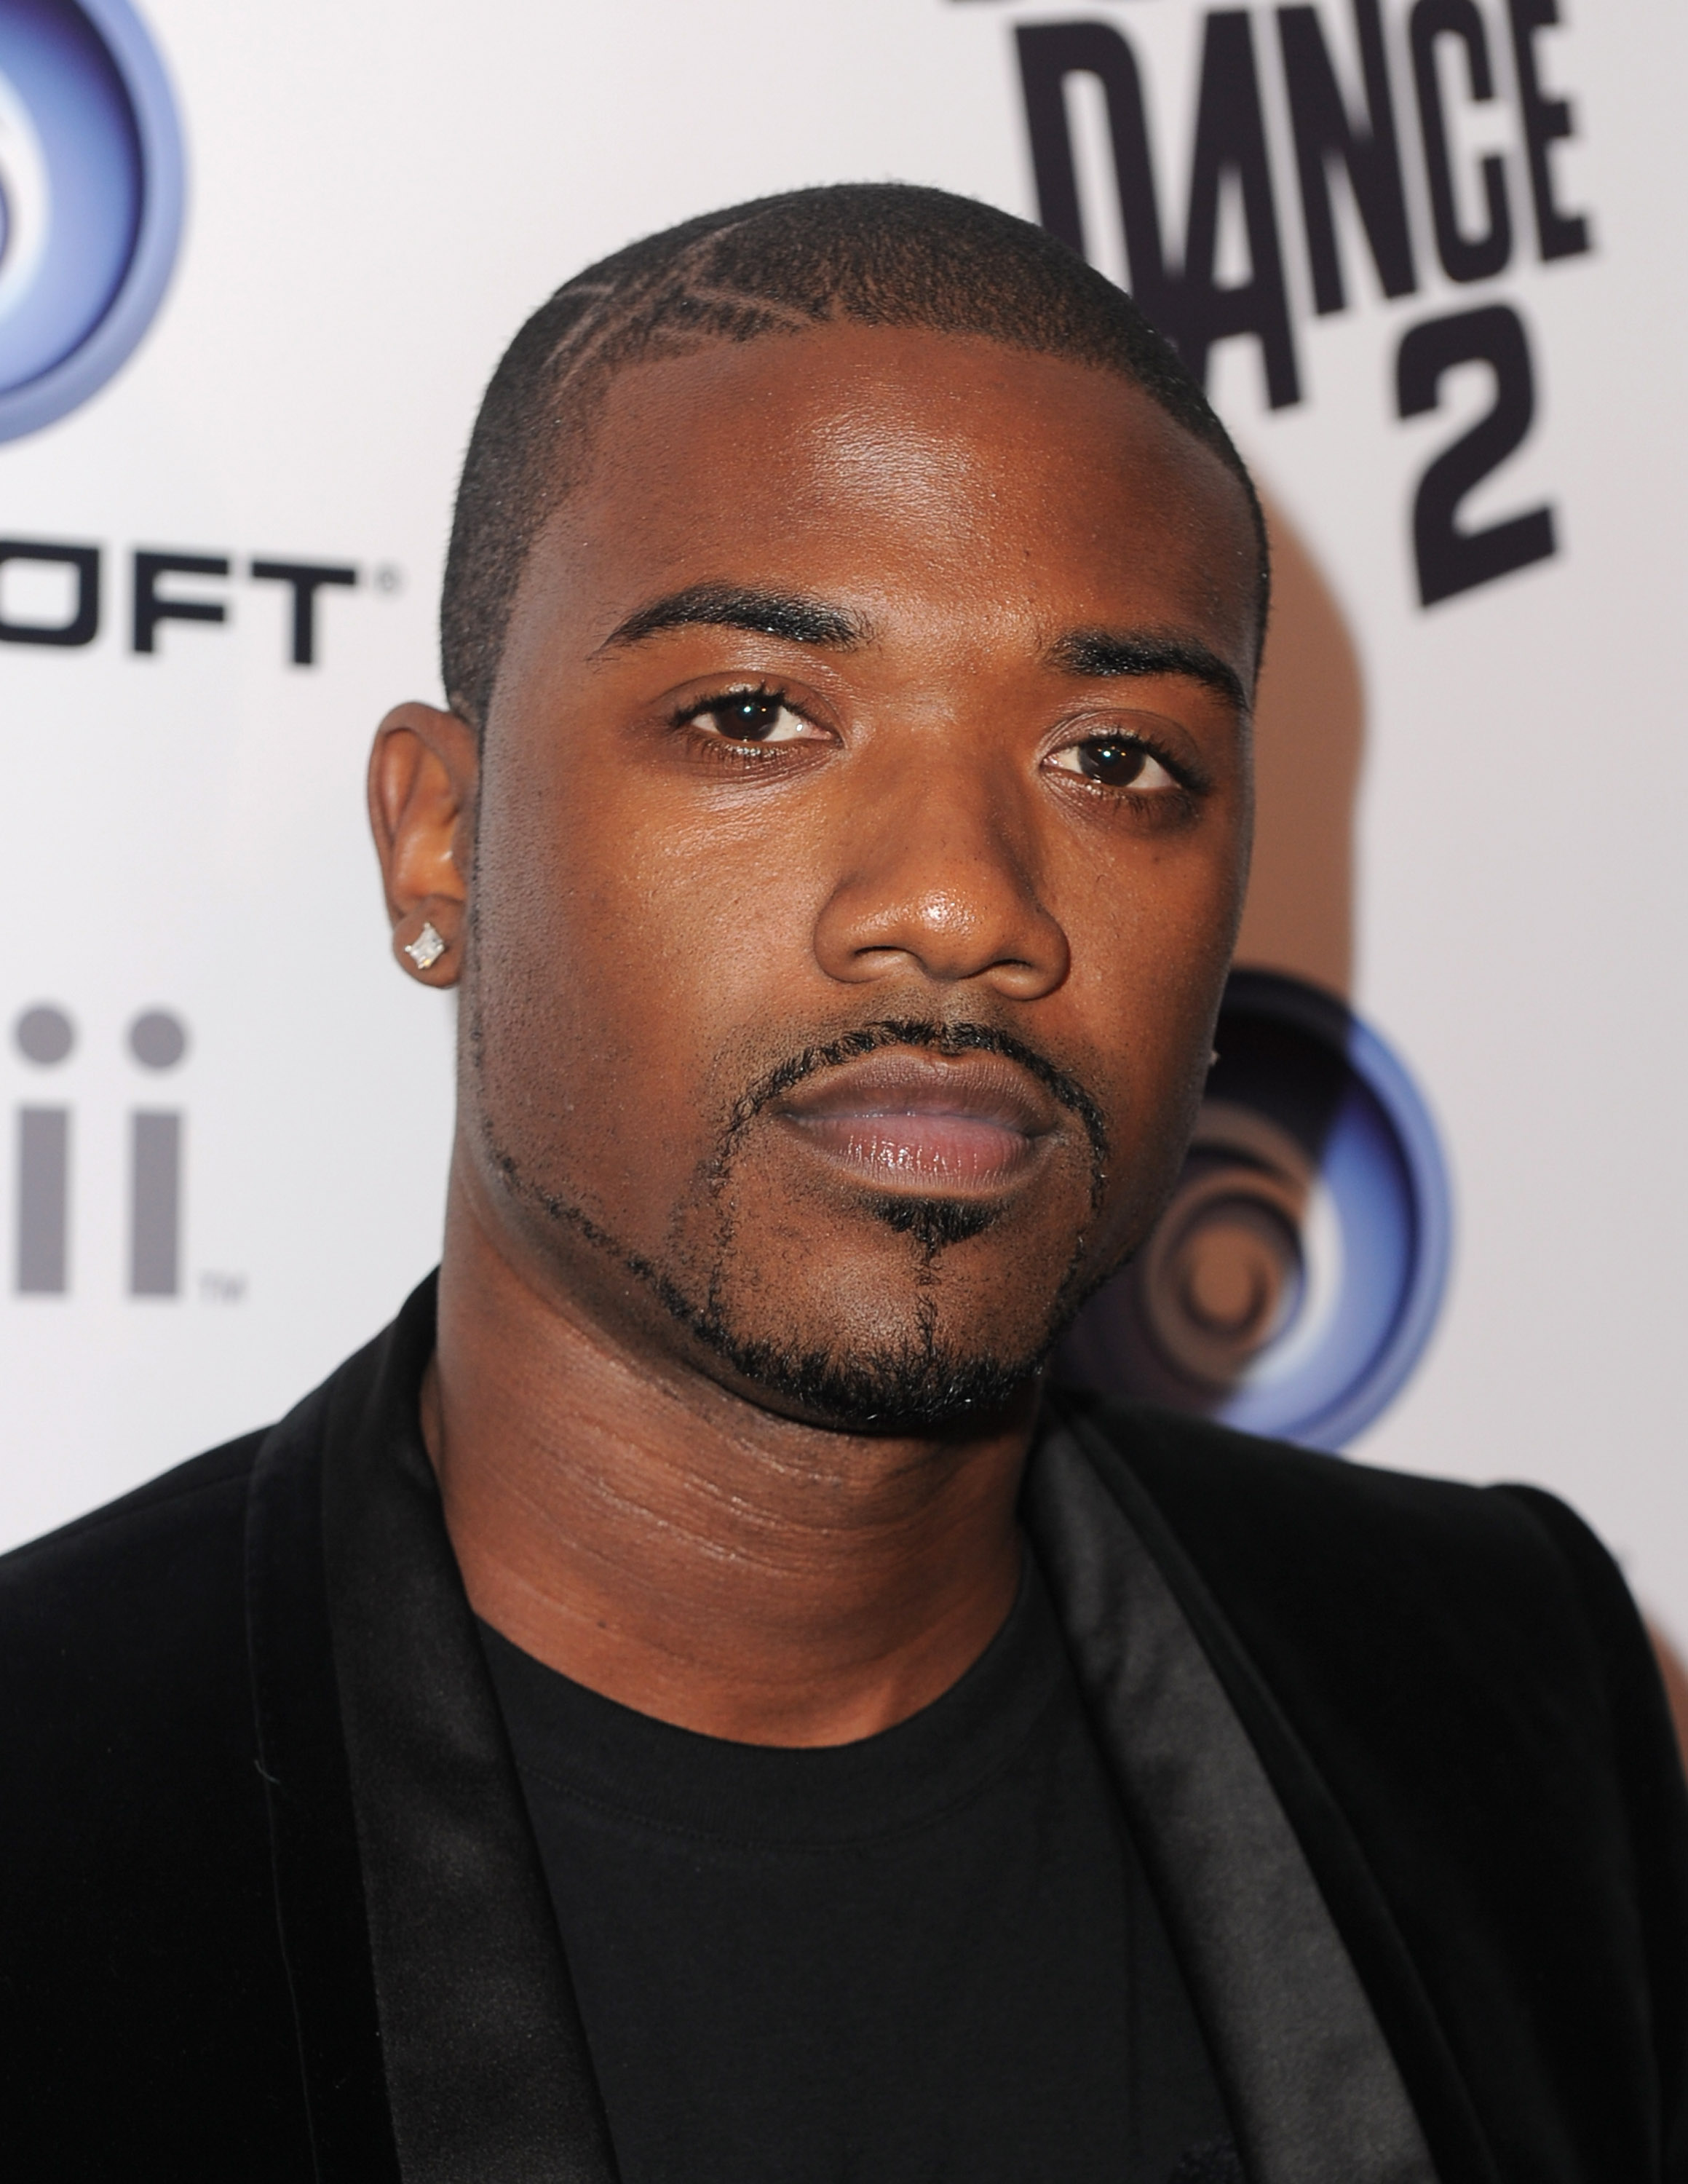 Pictures of Ray J - Pictures Of Celebrities